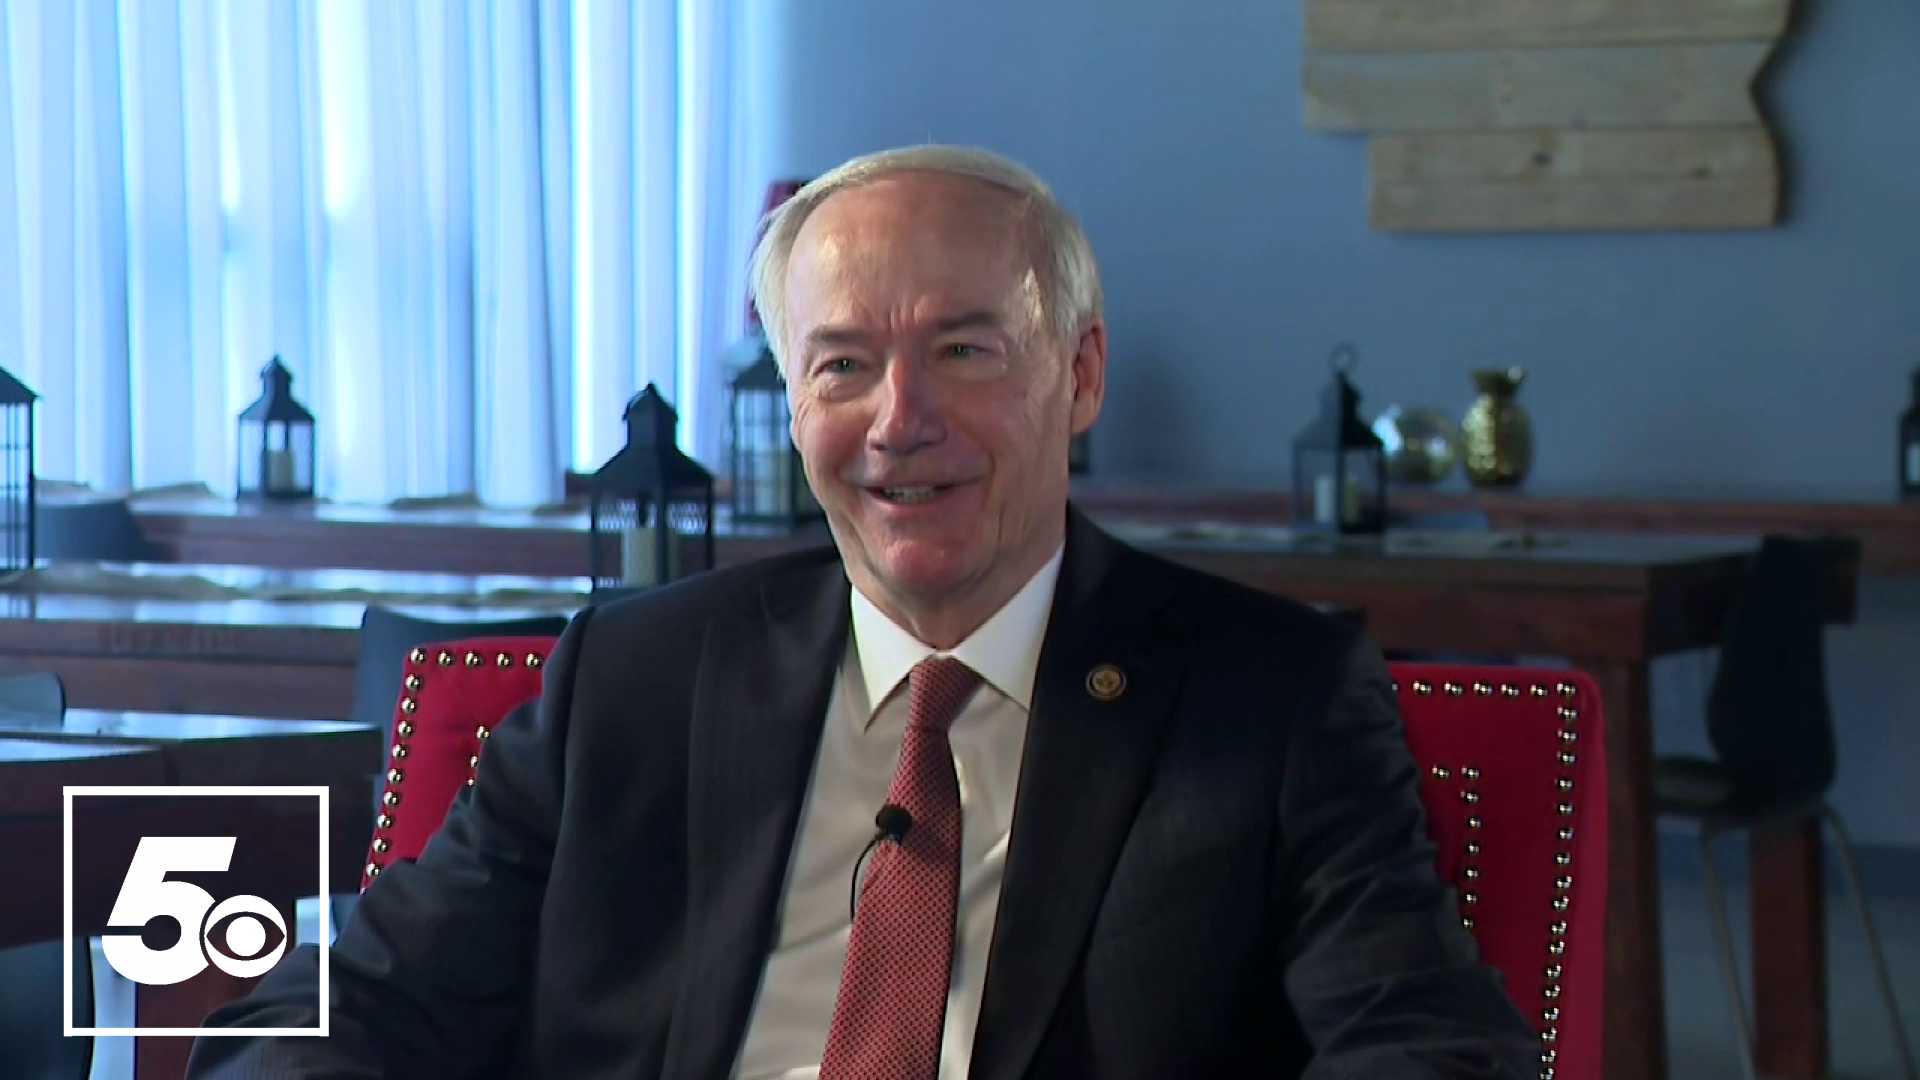 Ark. Governor Asa Hutchinson talked with a political expert about the wild 2021 legislative session in the state, how Covid-19 recovery is going and future plans.